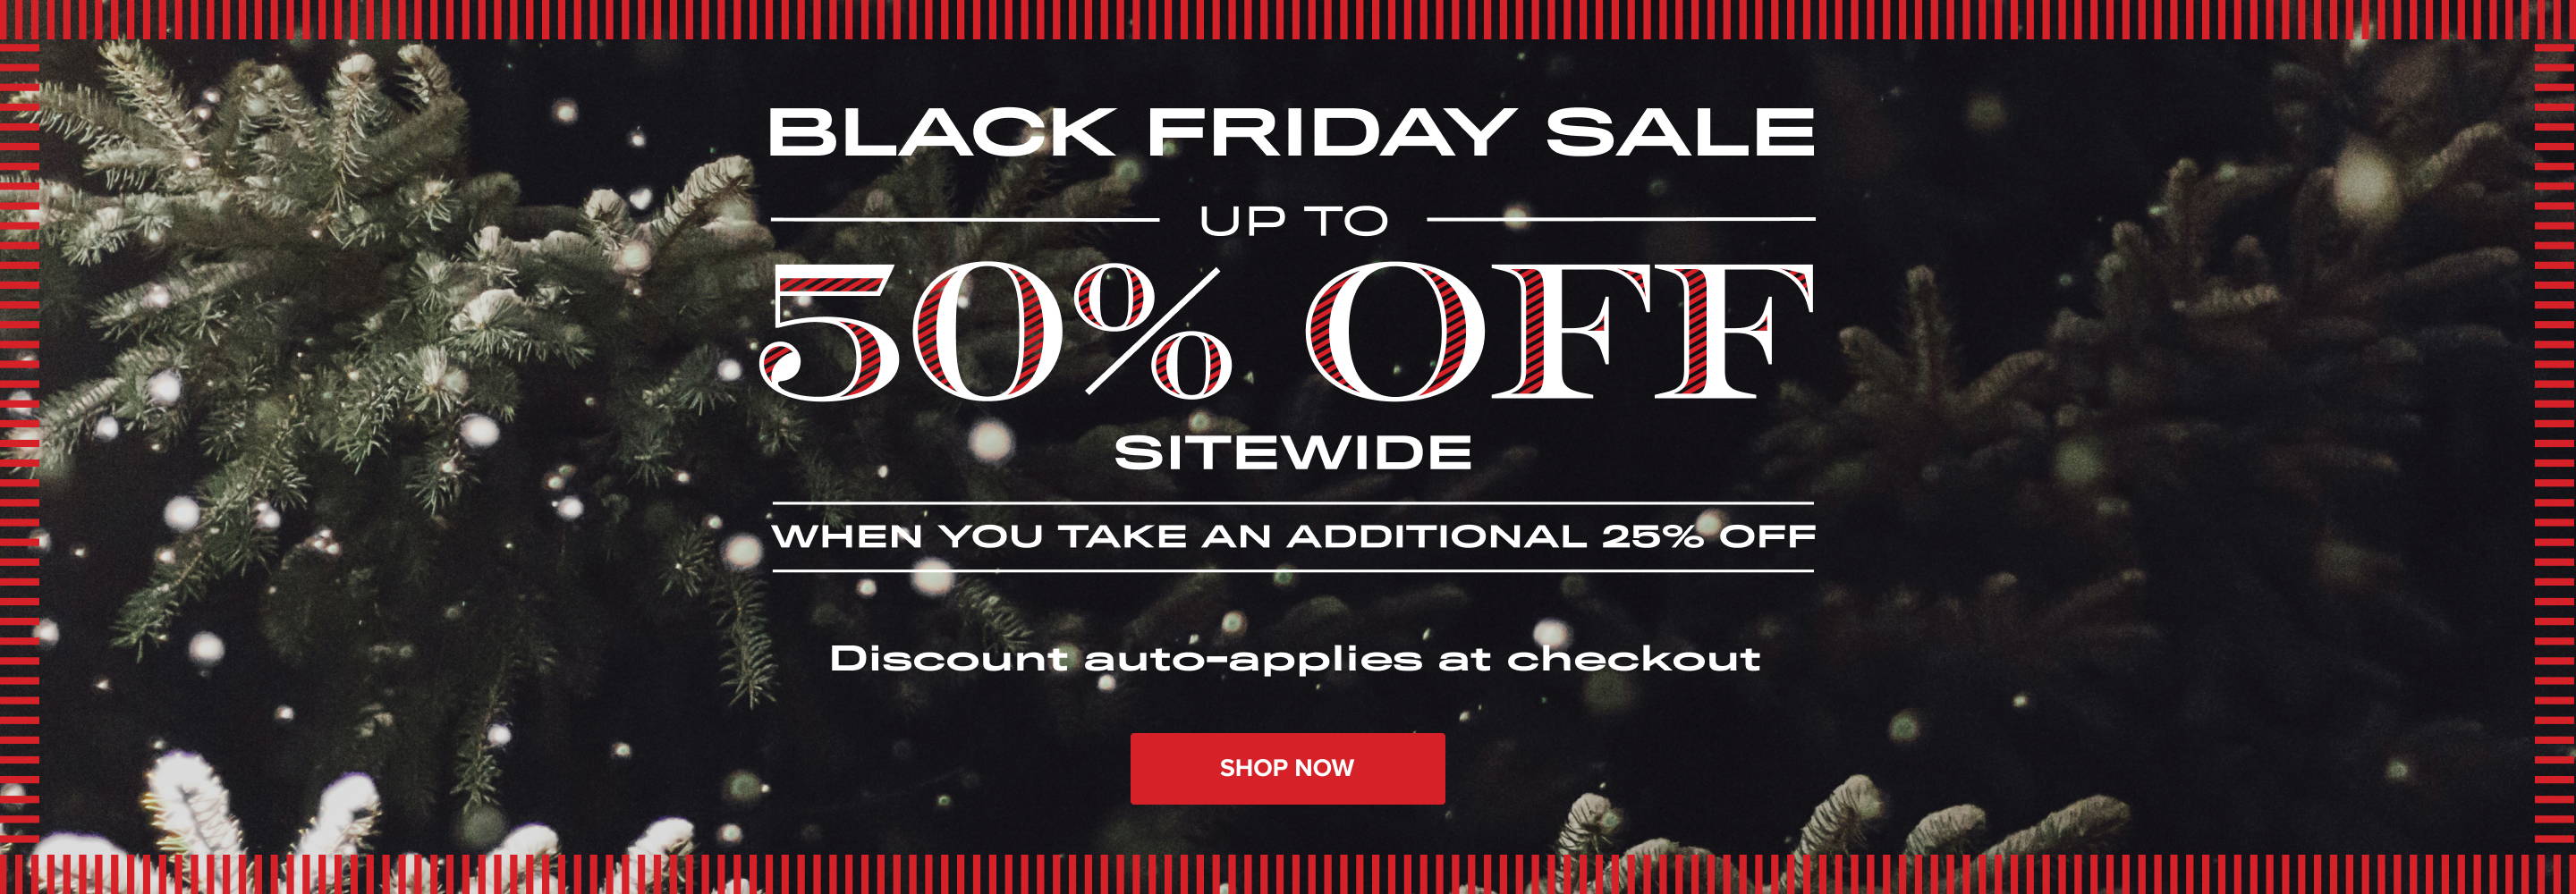 Black Friday Sale. Up to 50% off sitewide. Discount auto-applied at checkout.